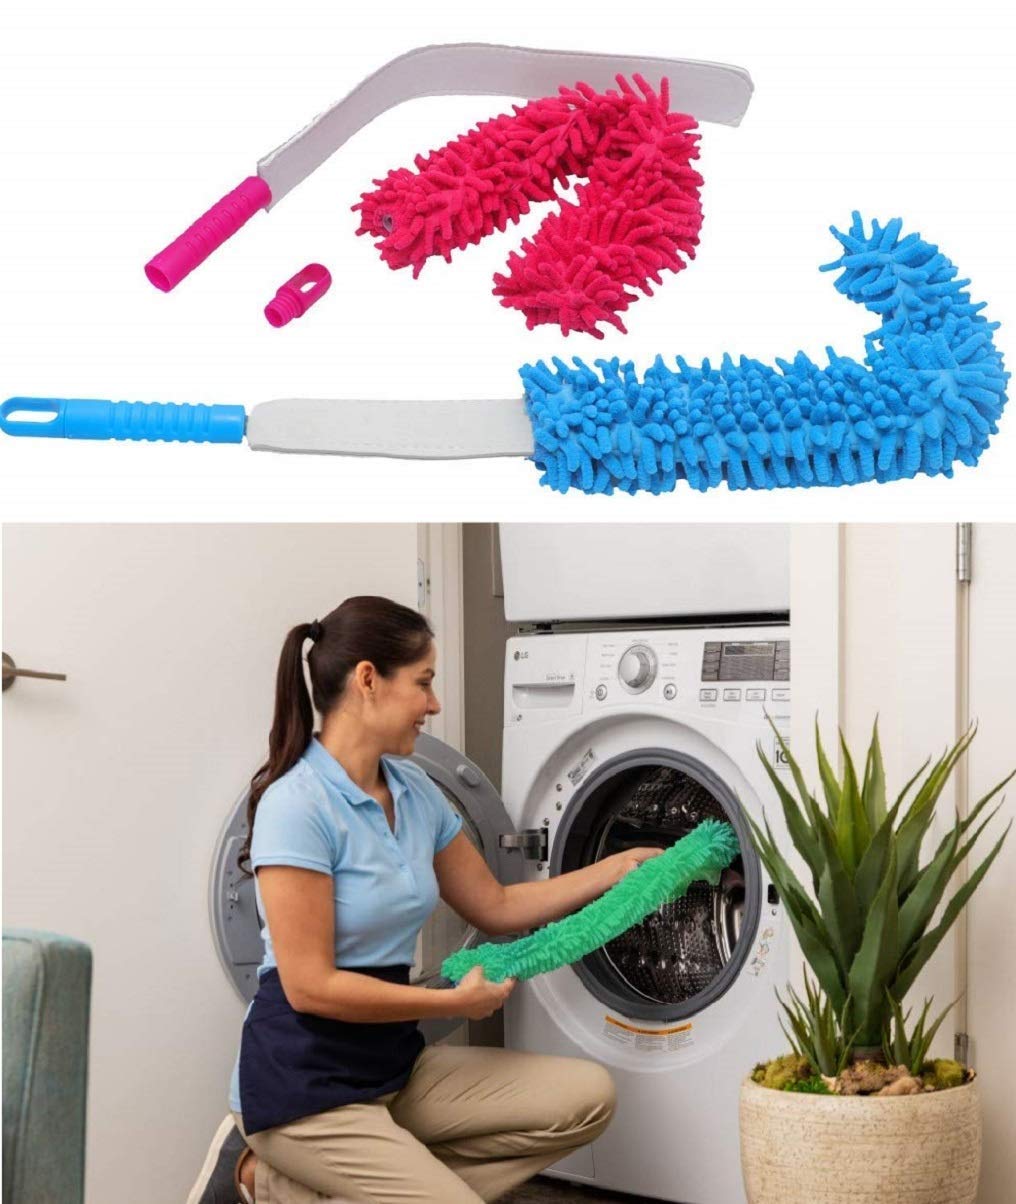 Cleaning Duster Brush with Extendable Rod, Dust Cleaner for Home, Fan Cleaning Brush with Long Rod, Dusters for House Cleaning (Multi-Color)